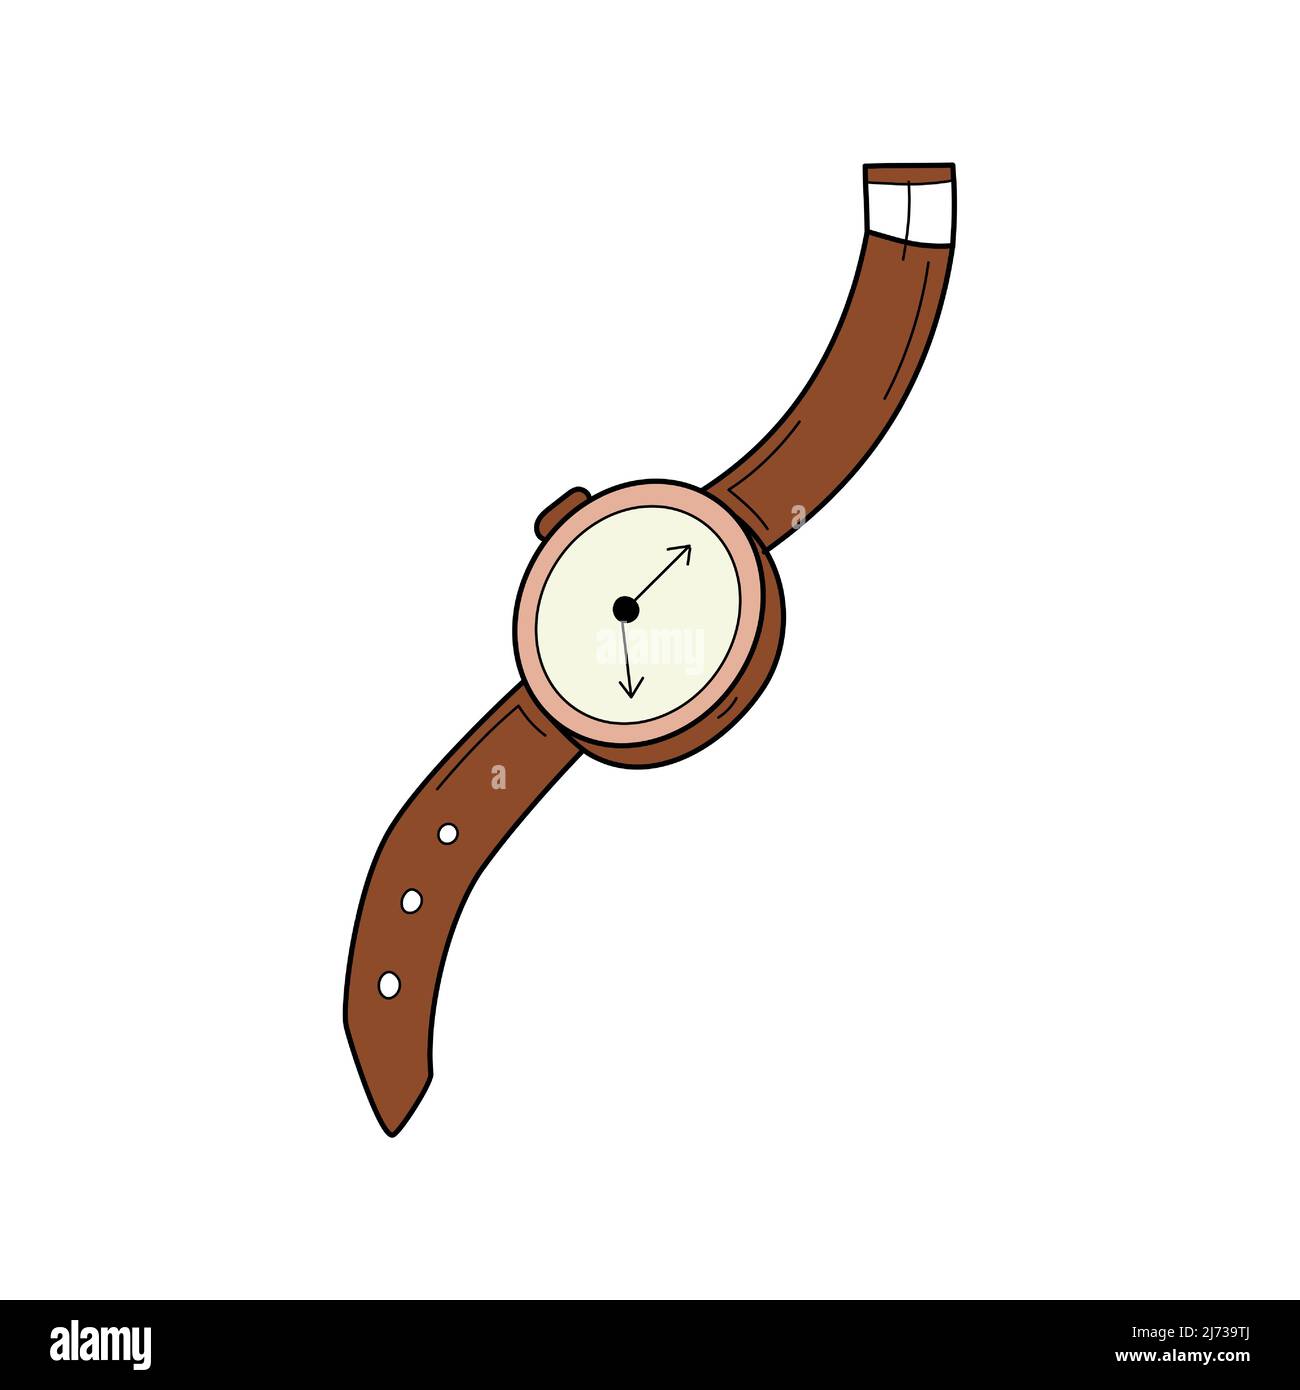 A wrist watch with a strap. Doodle style. Hand-drawn Colorful illustration. The design elements are isolated on a white background Stock Vector